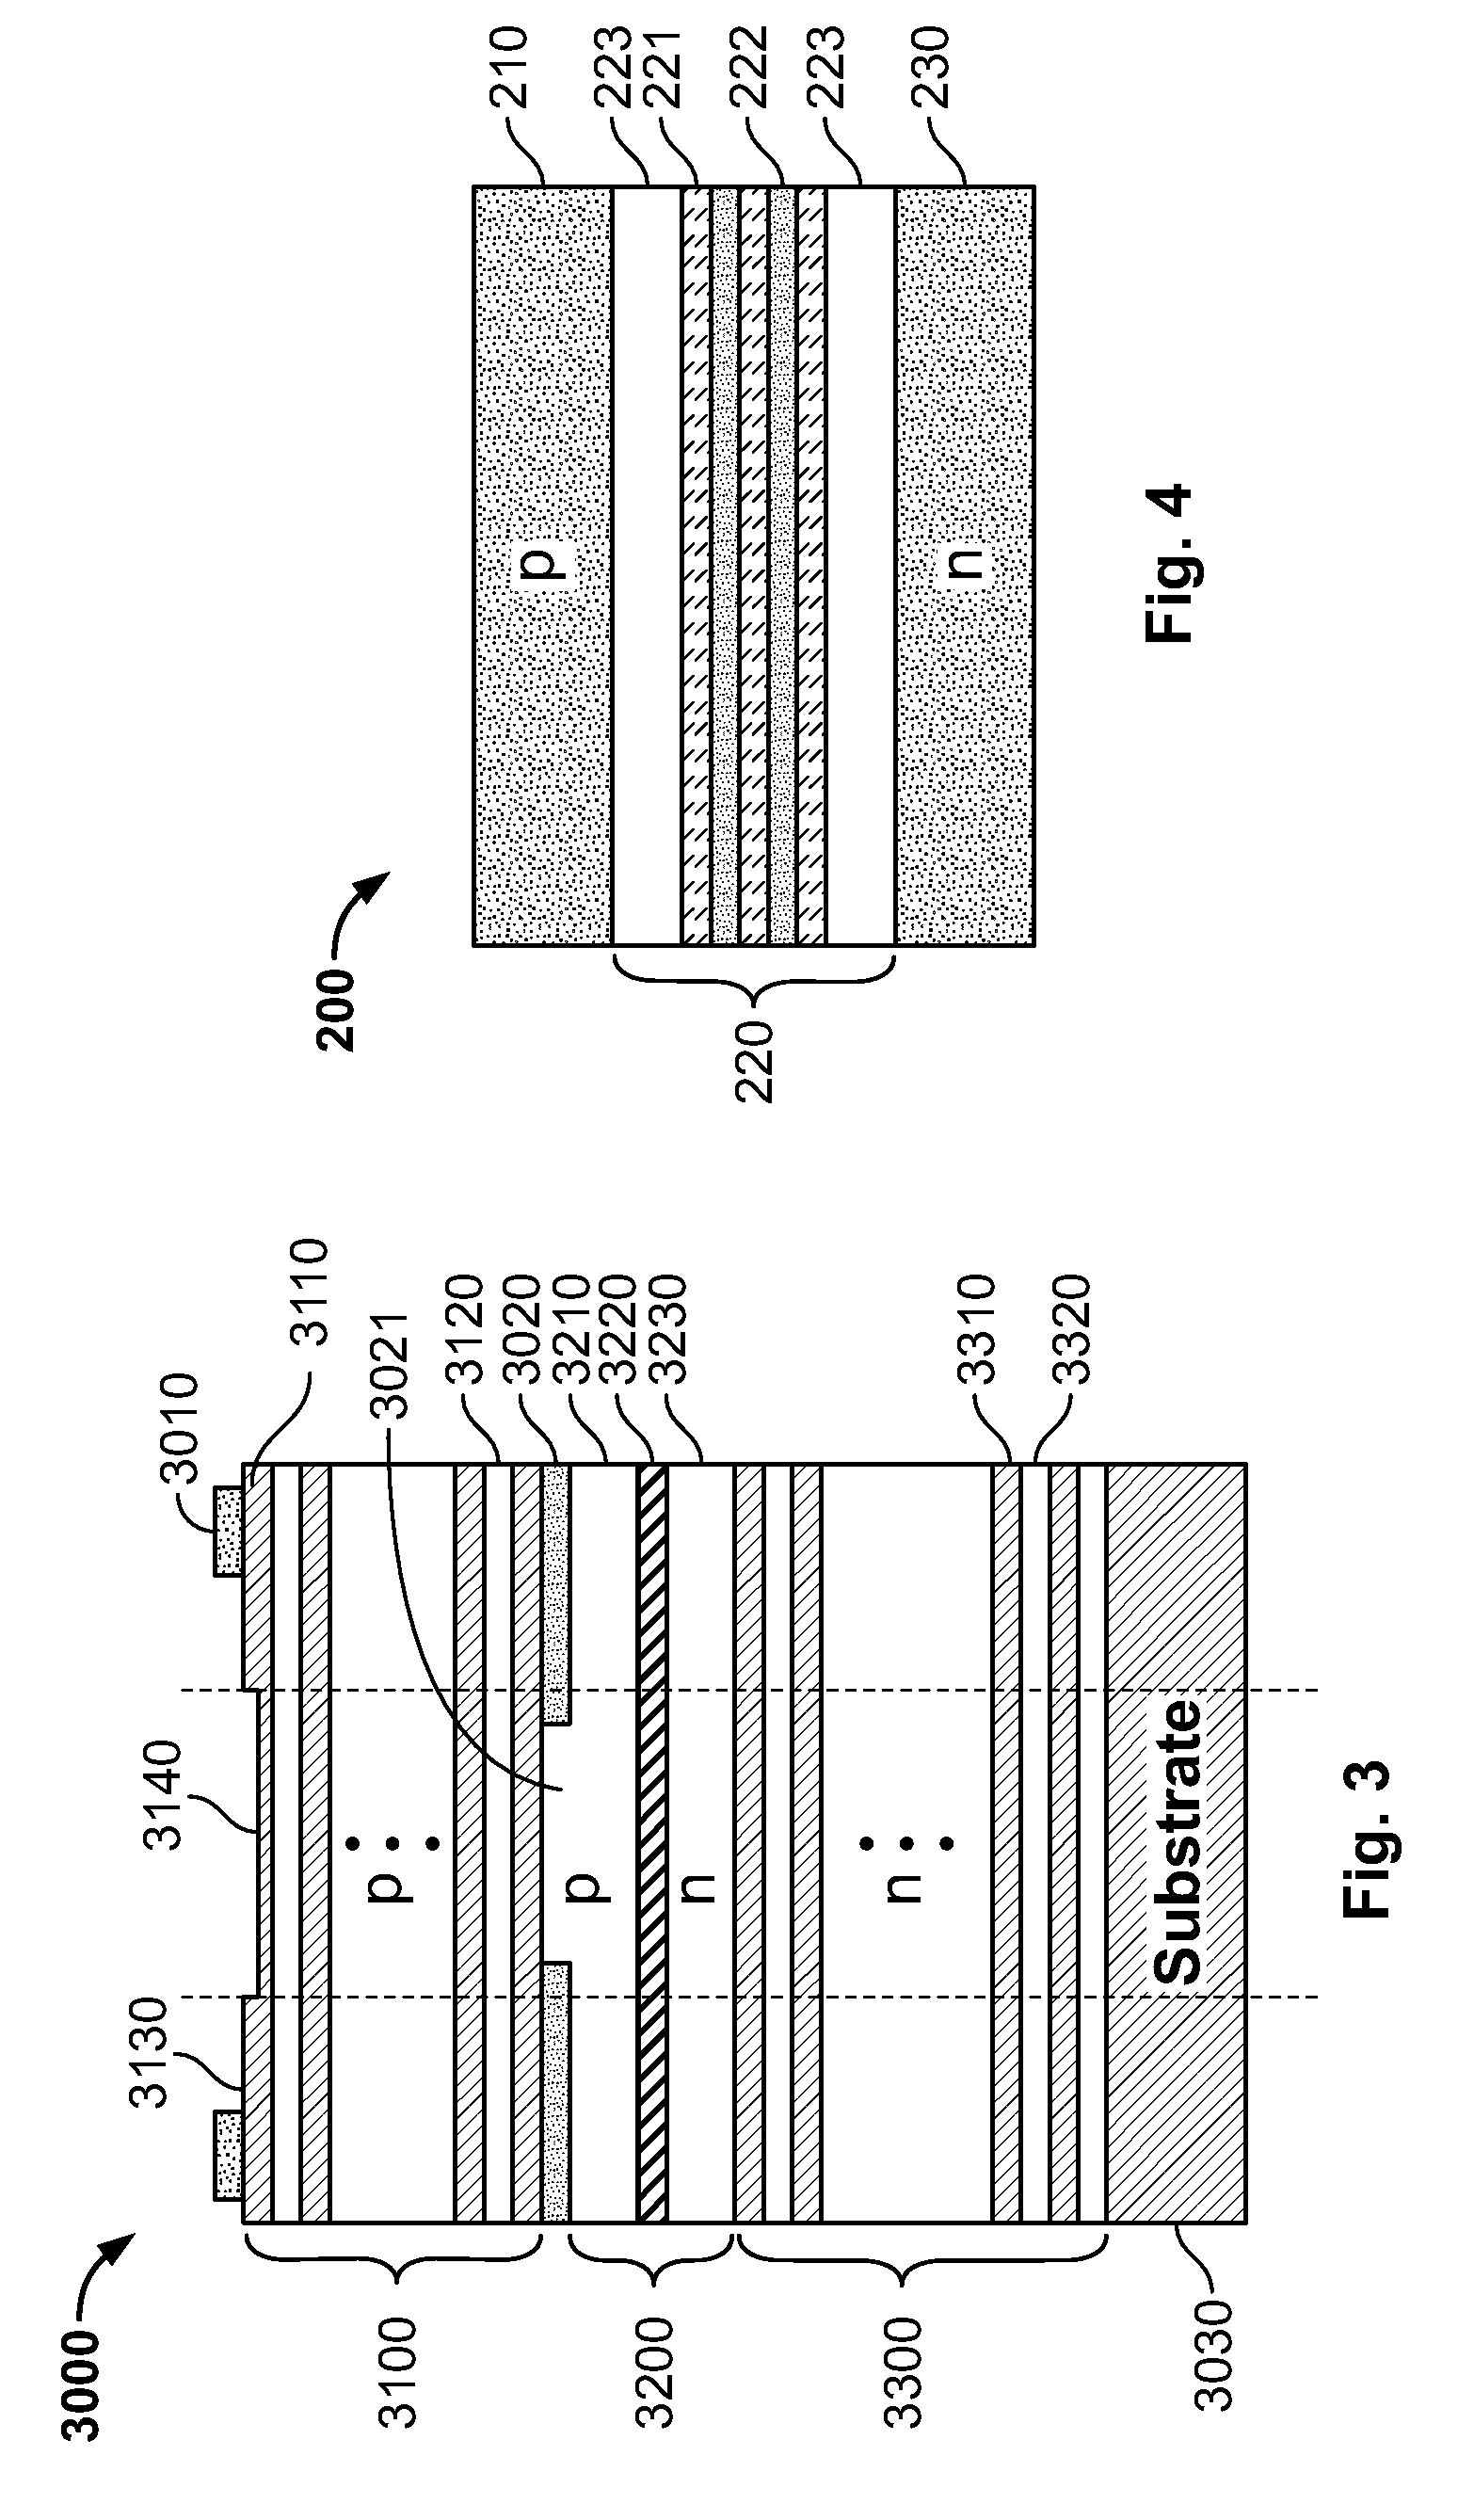 High speed lasing device